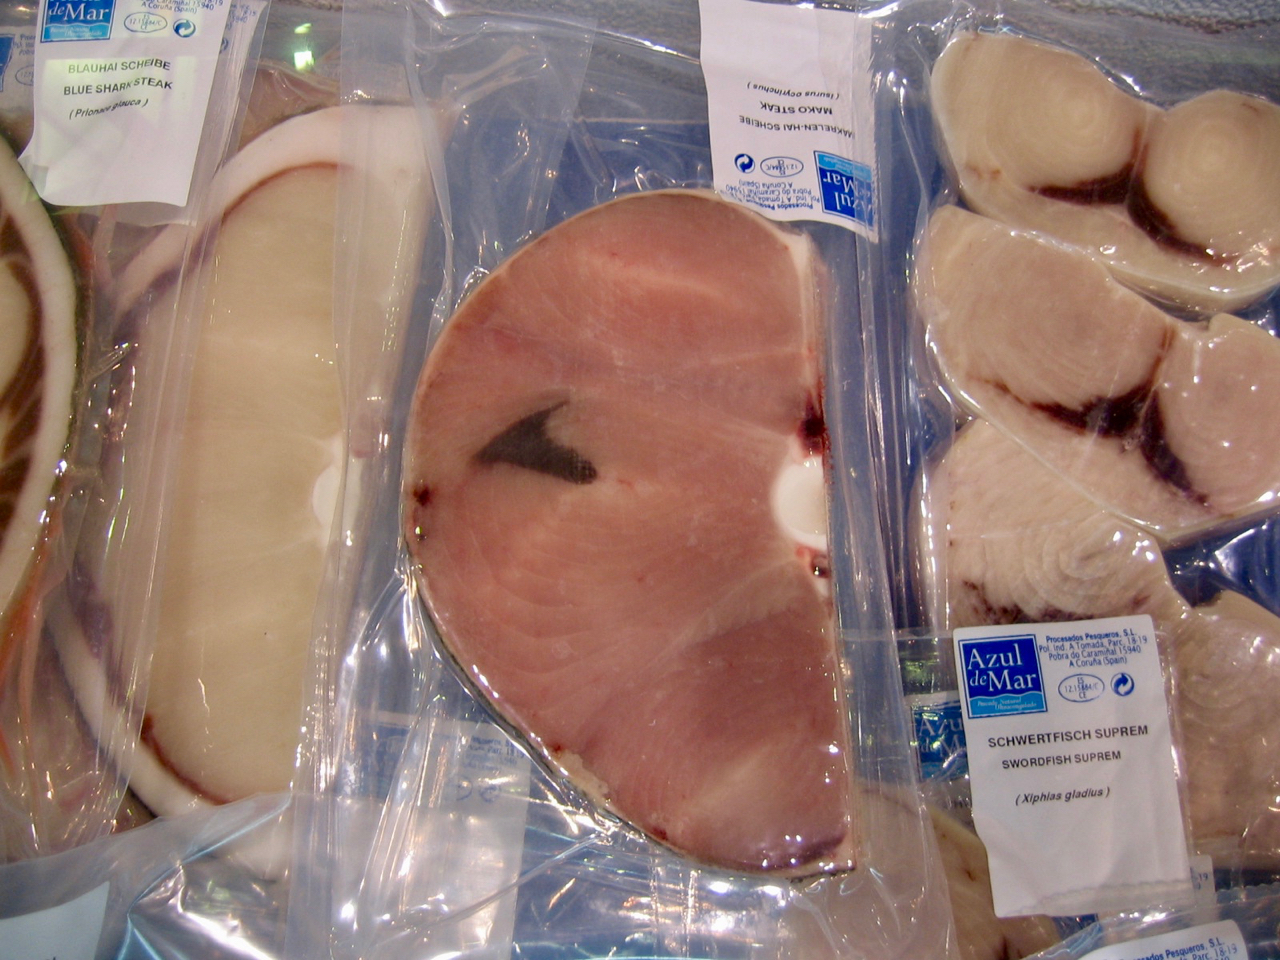 2.6 Billion Global Trade in Shark and Ray Meat 